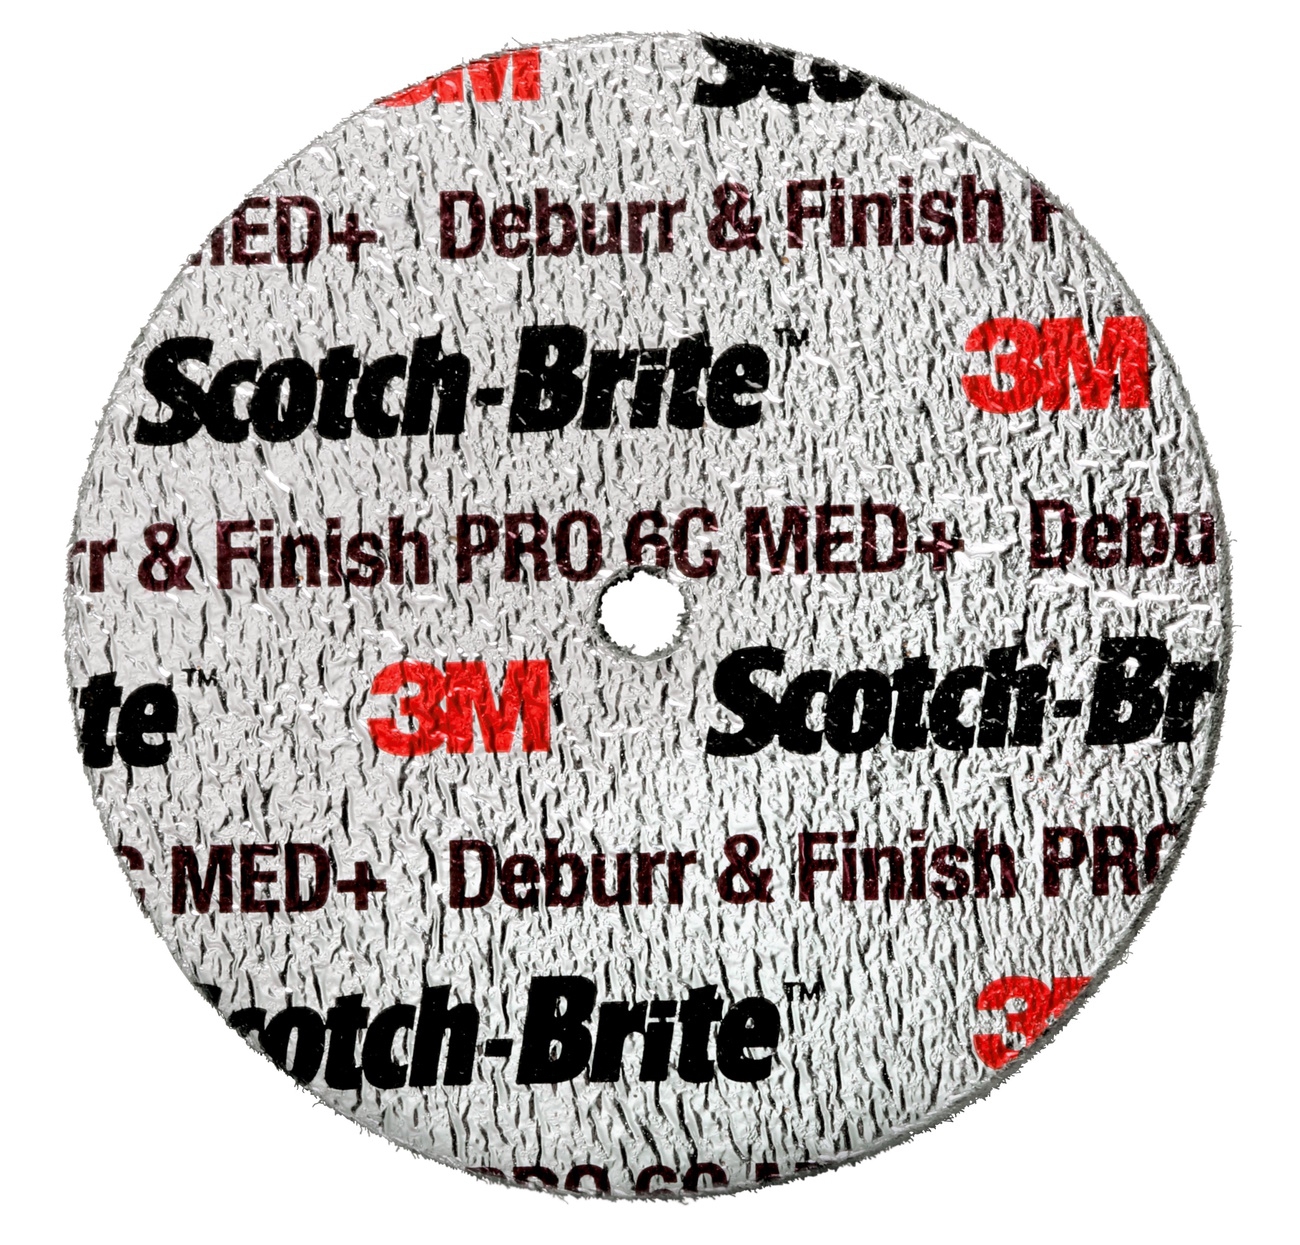 3M Scotch-Brite Deburr and Finish PRO compact disc DP-UW, 152 mm x 3.2 mm x 25 mm, 6C MED+